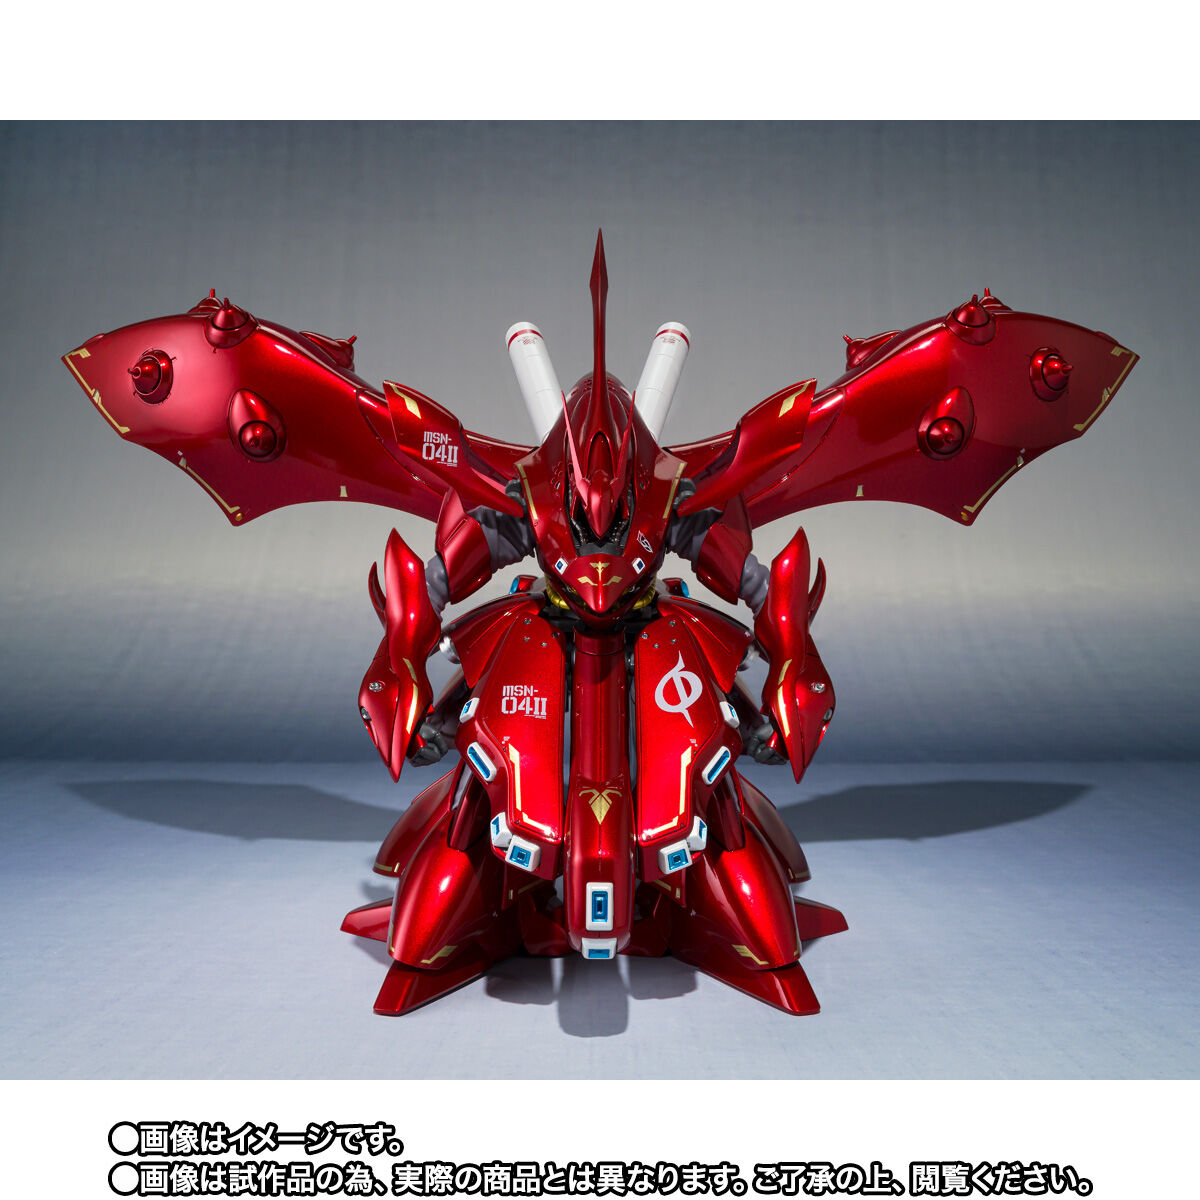 ROBOT魂 ＜SIDE MS＞ ナイチンゲール ～CHAR’s SPECIAL COLOR～